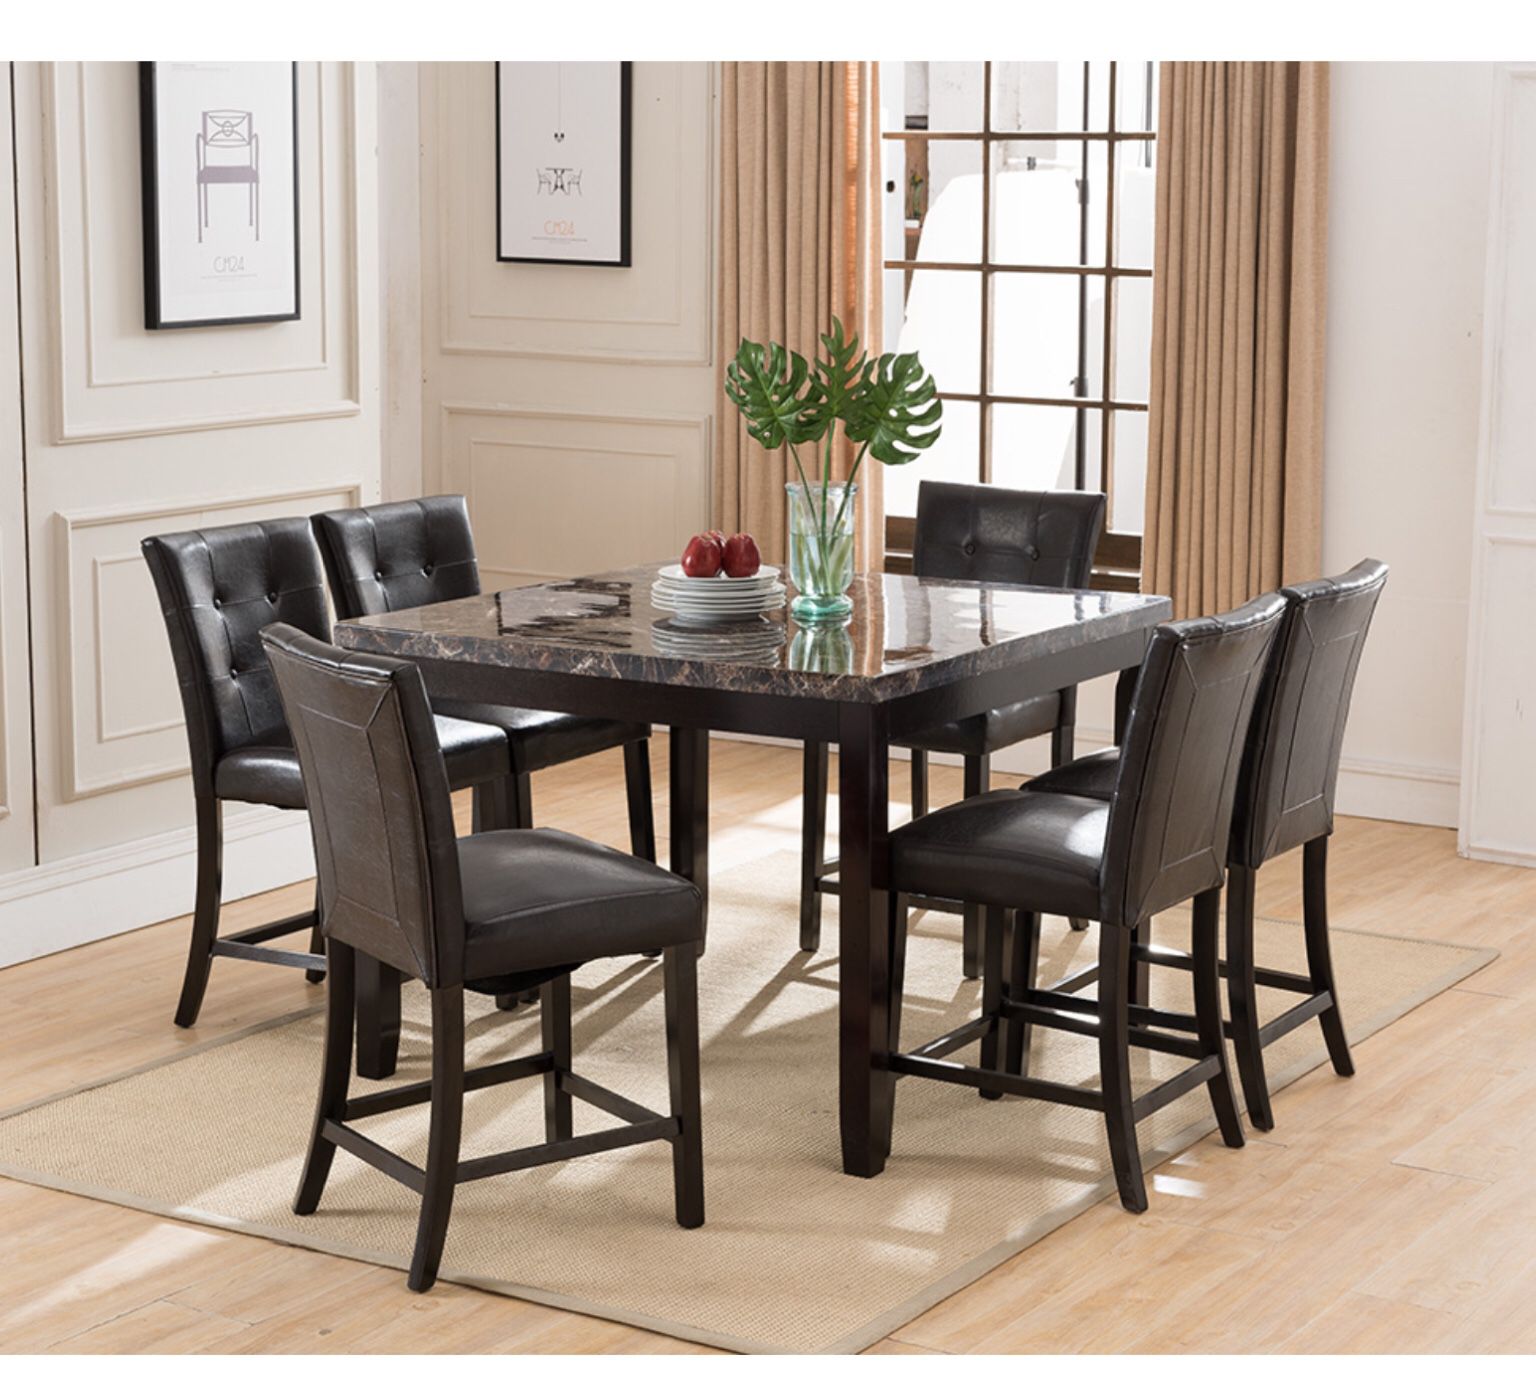 Marble Dining Table & 6 Chairs On Sale $599.99